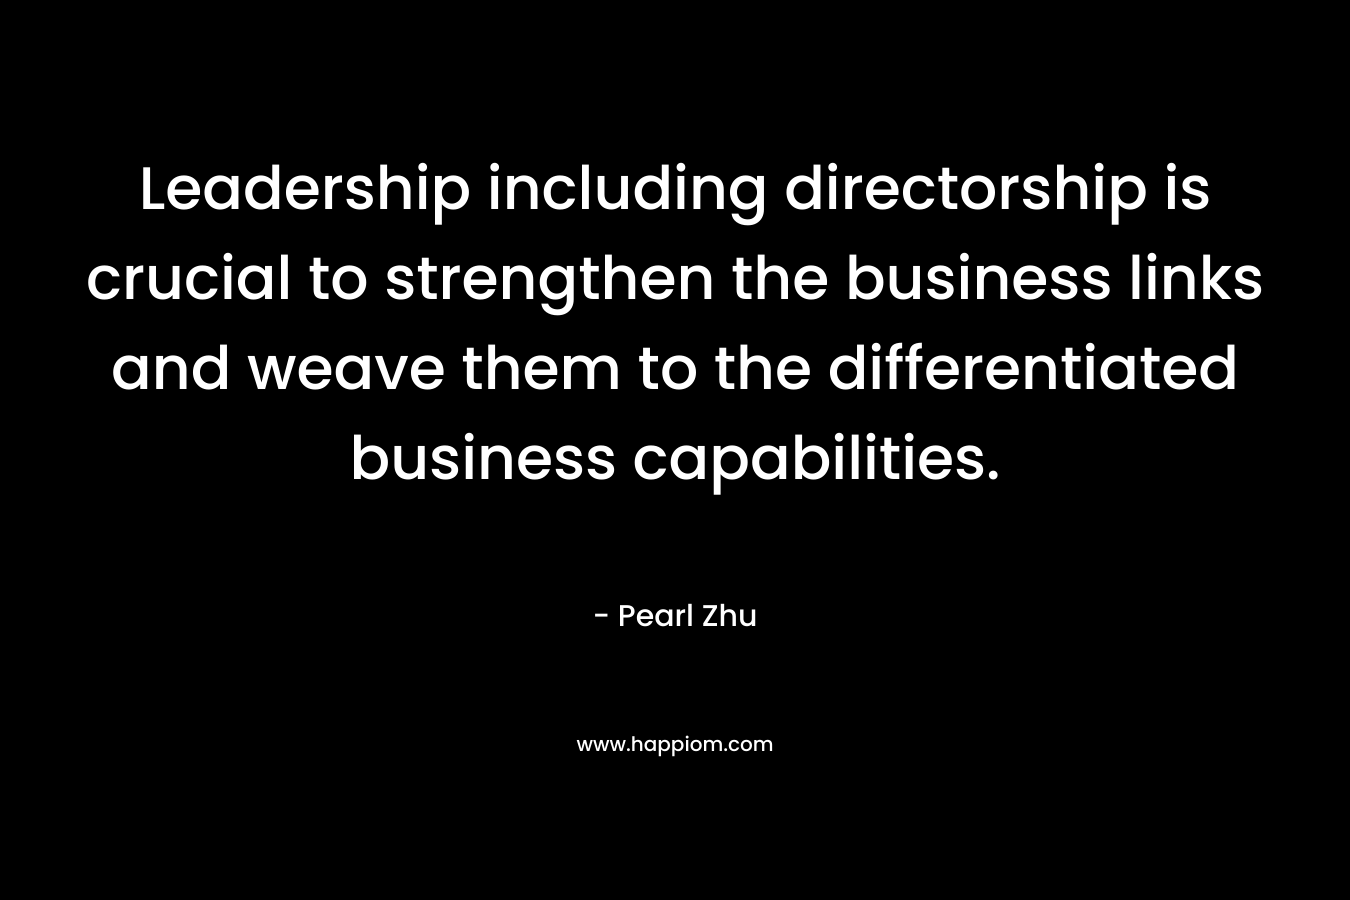 Leadership including directorship is crucial to strengthen the business links and weave them to the differentiated business capabilities.